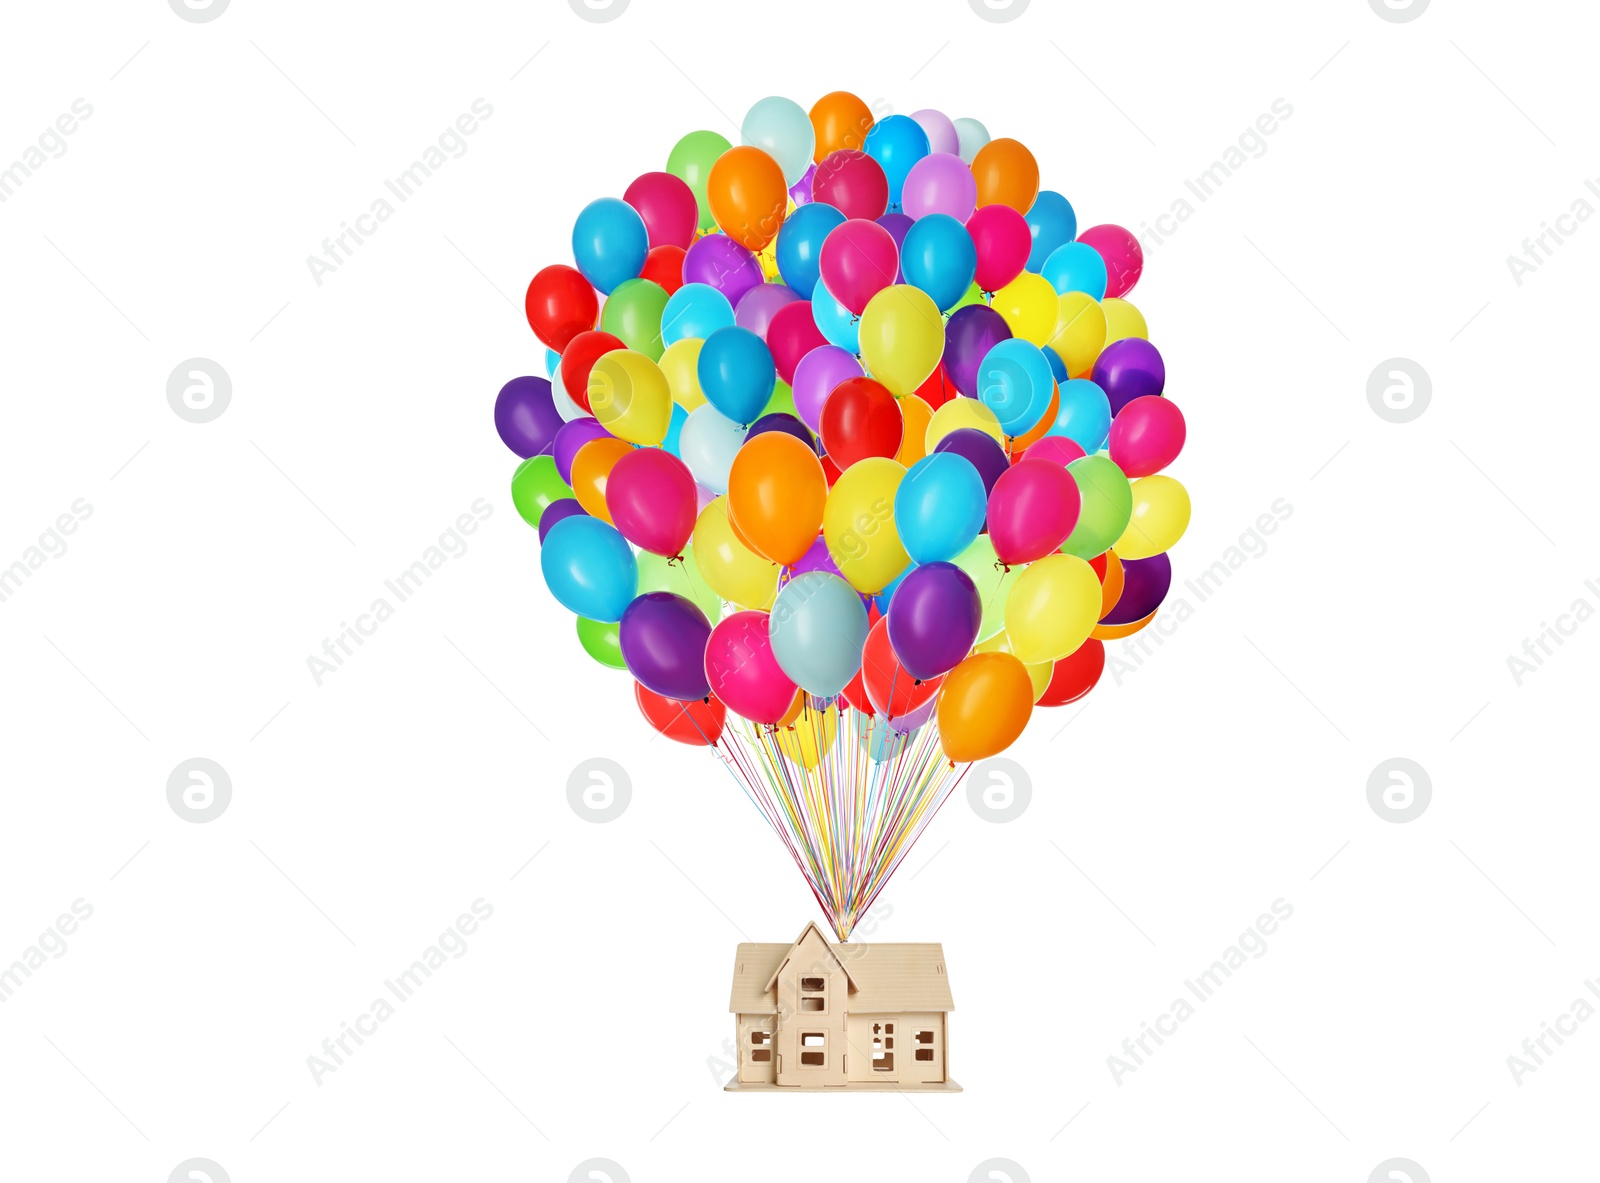 Image of Many balloons tied to model of house flying on white background